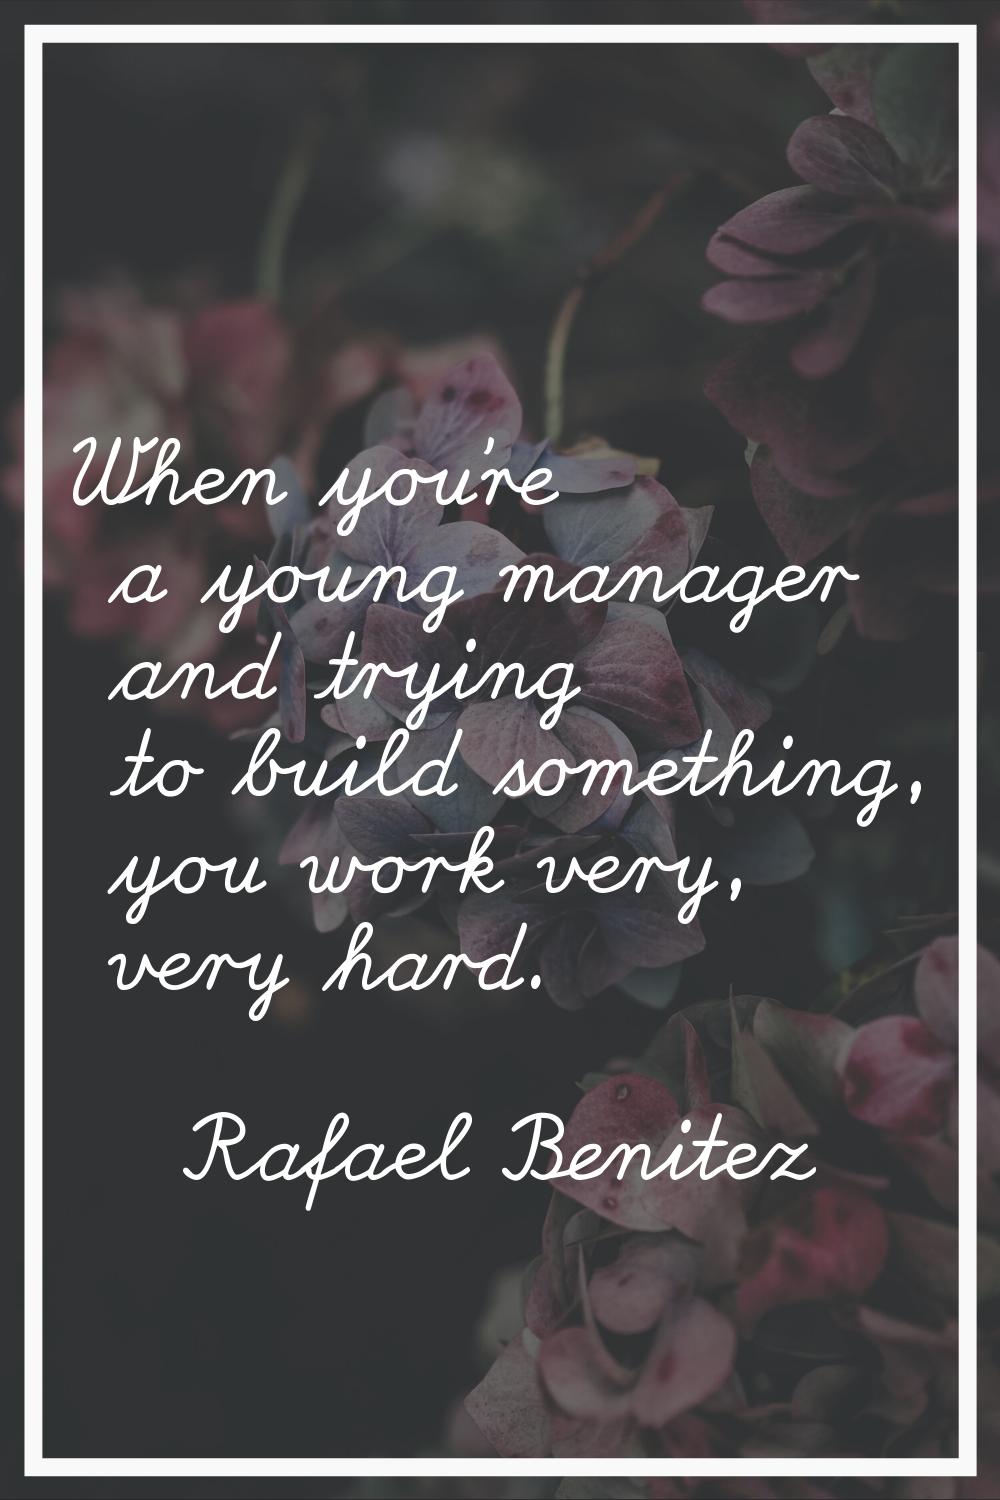 When you're a young manager and trying to build something, you work very, very hard.